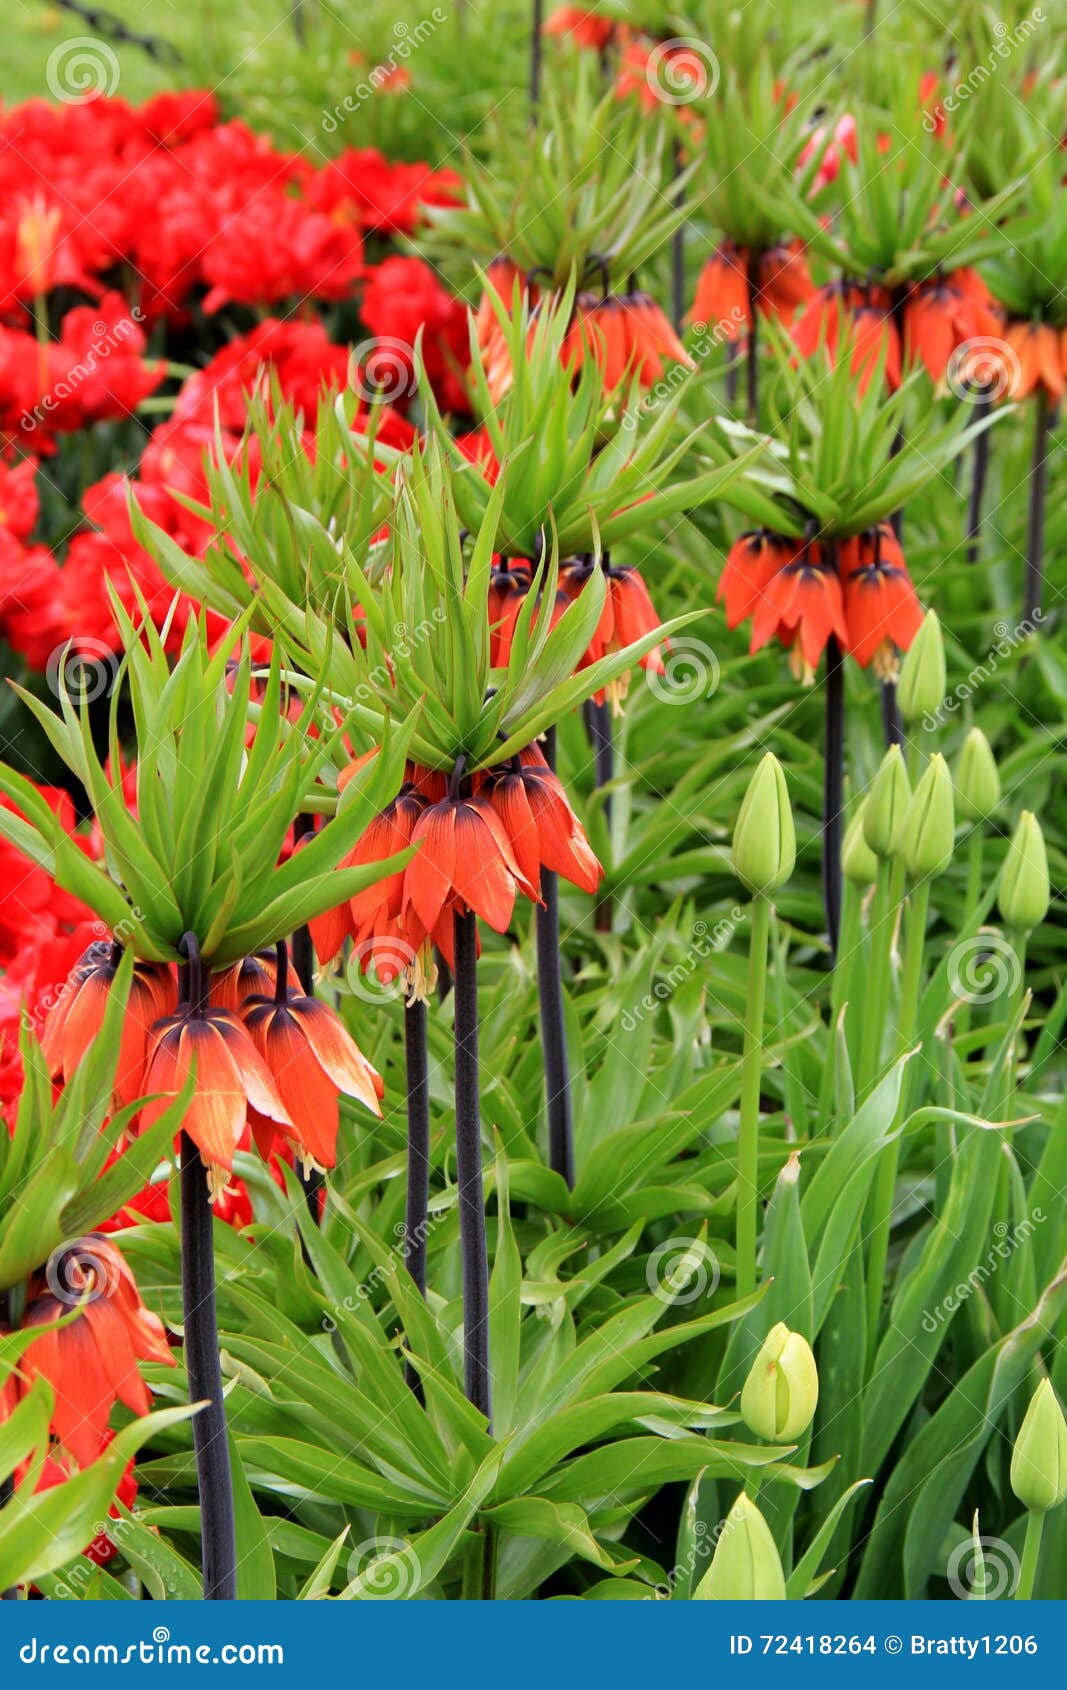 Gorgeous Bed Of Colorful Tulips Red Crown Imperial The Center Of Attention Stock Photo Image Of Flower Detail 72418264